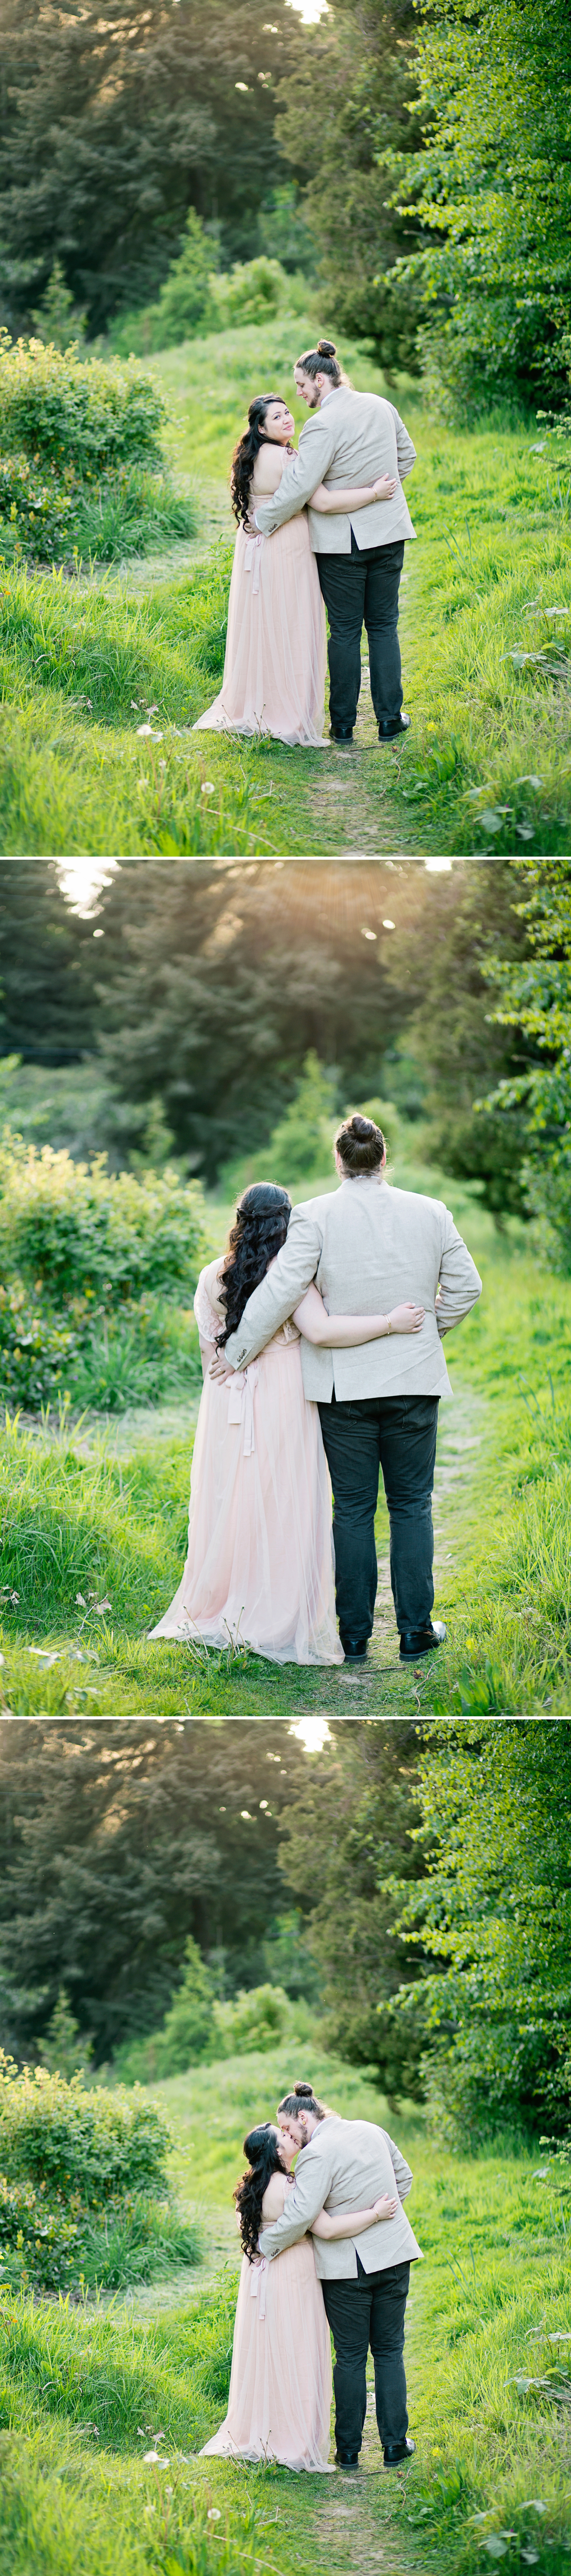 22-Bride-Groom-Portraits-Married-Discovery-Park-Woodland-Sunset-Elopement-Seattle-Photographer-Wedding-Photography-by-Betty-Elaine-Blush-BHLDN-Wedding-Gown-Dress